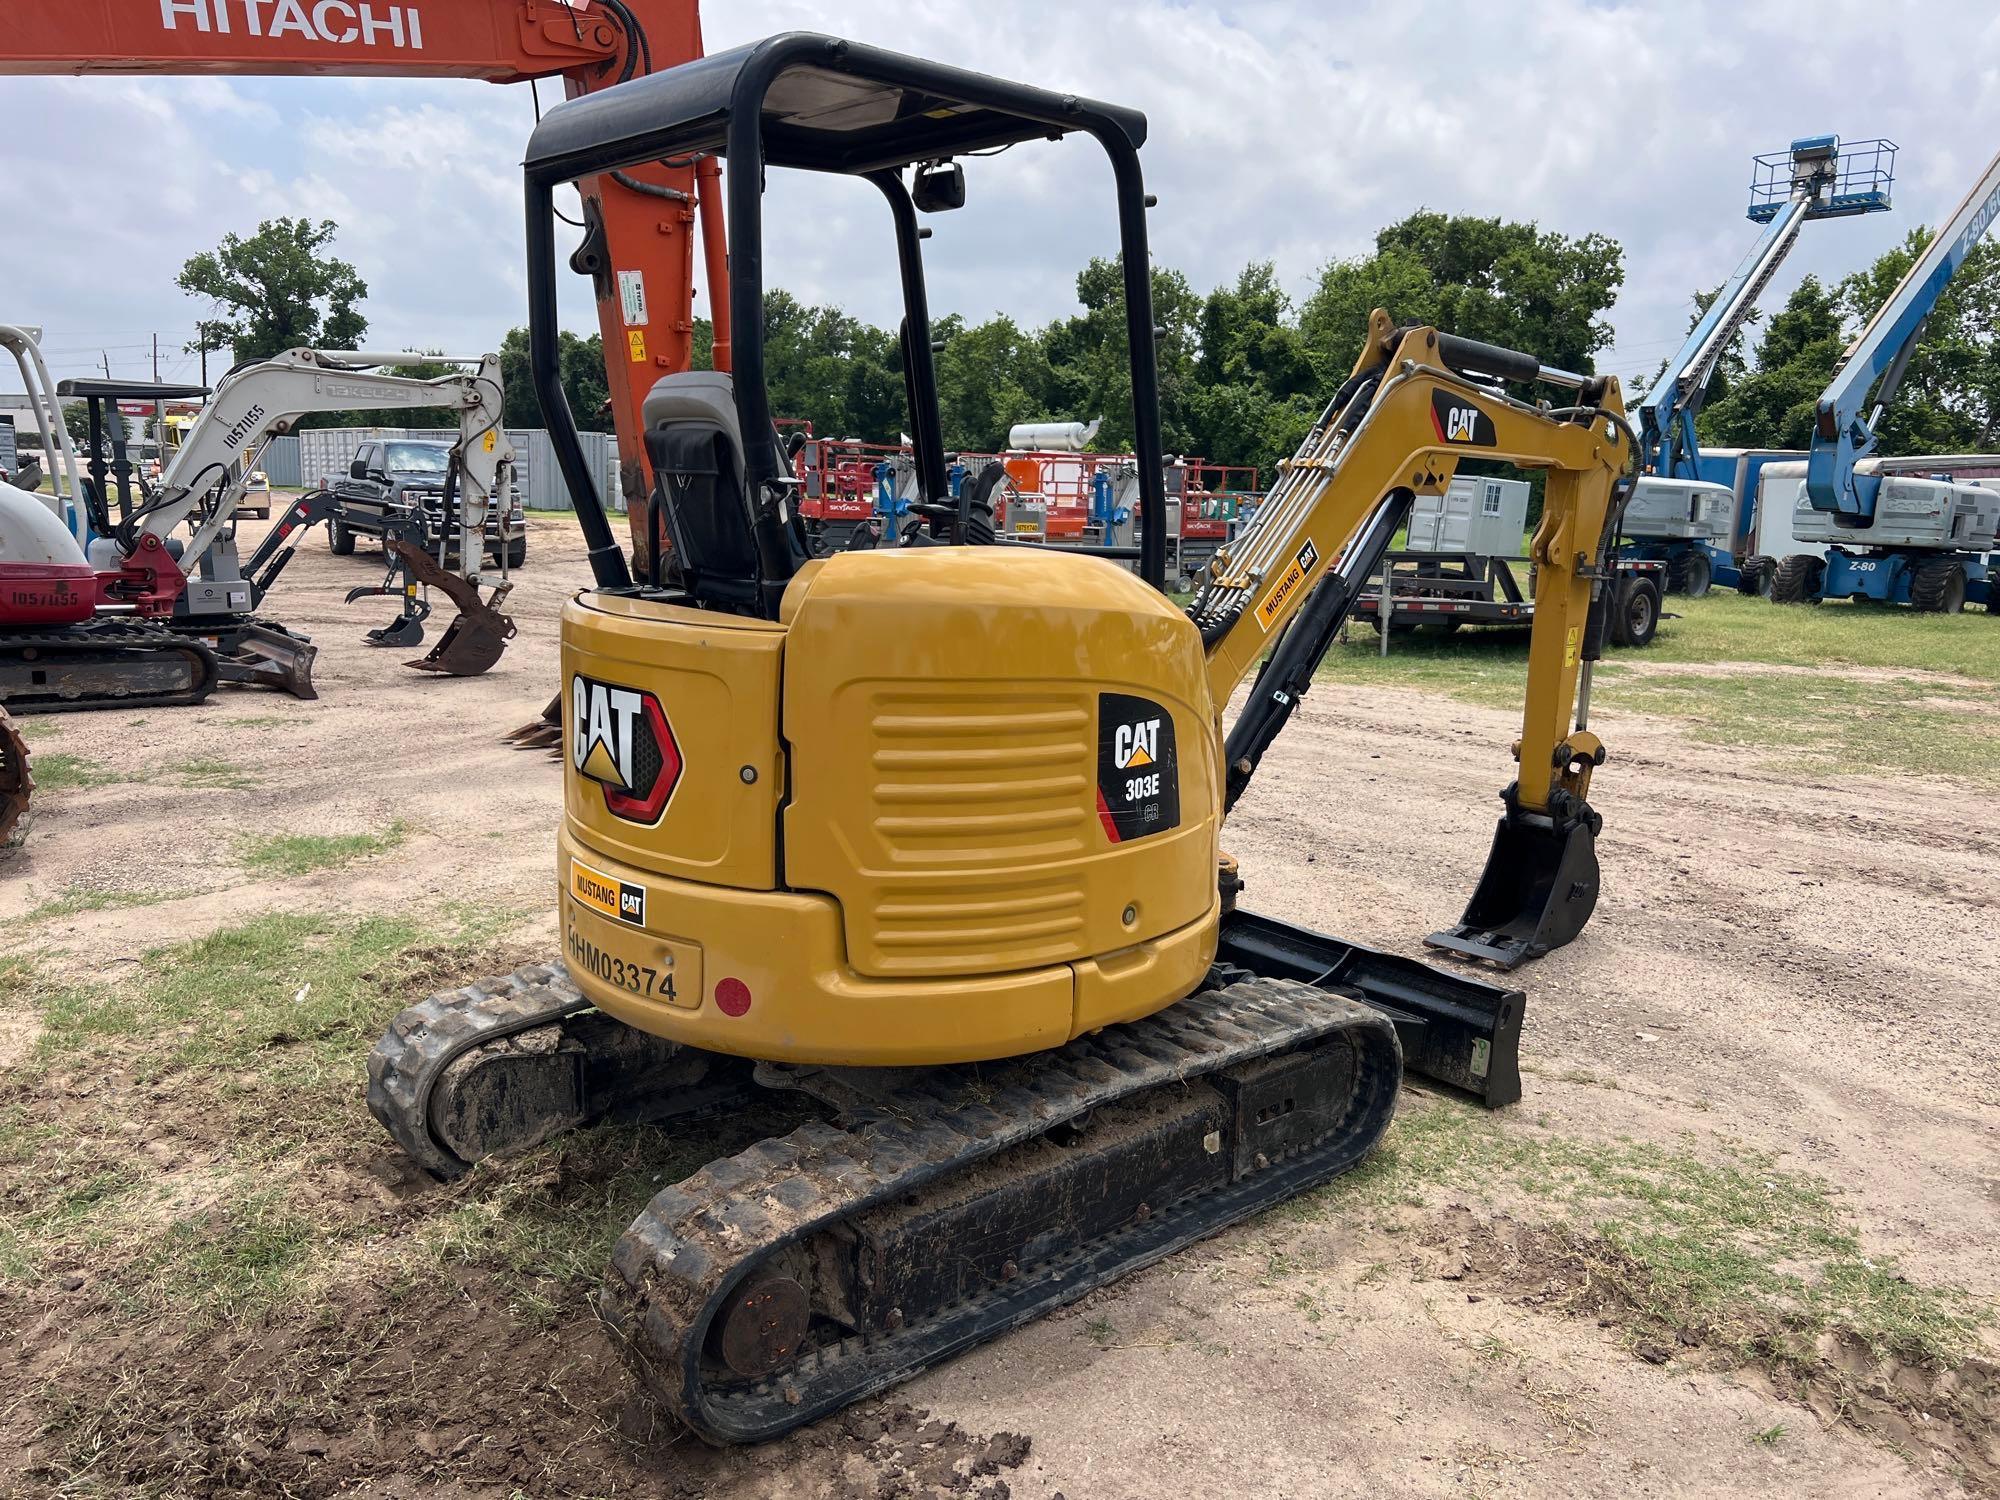 2018 CAT 303E HYDRAULIC EXCAVATOR SN:HHM03374 powered by Cat diesel engine, equipped with OROPS,